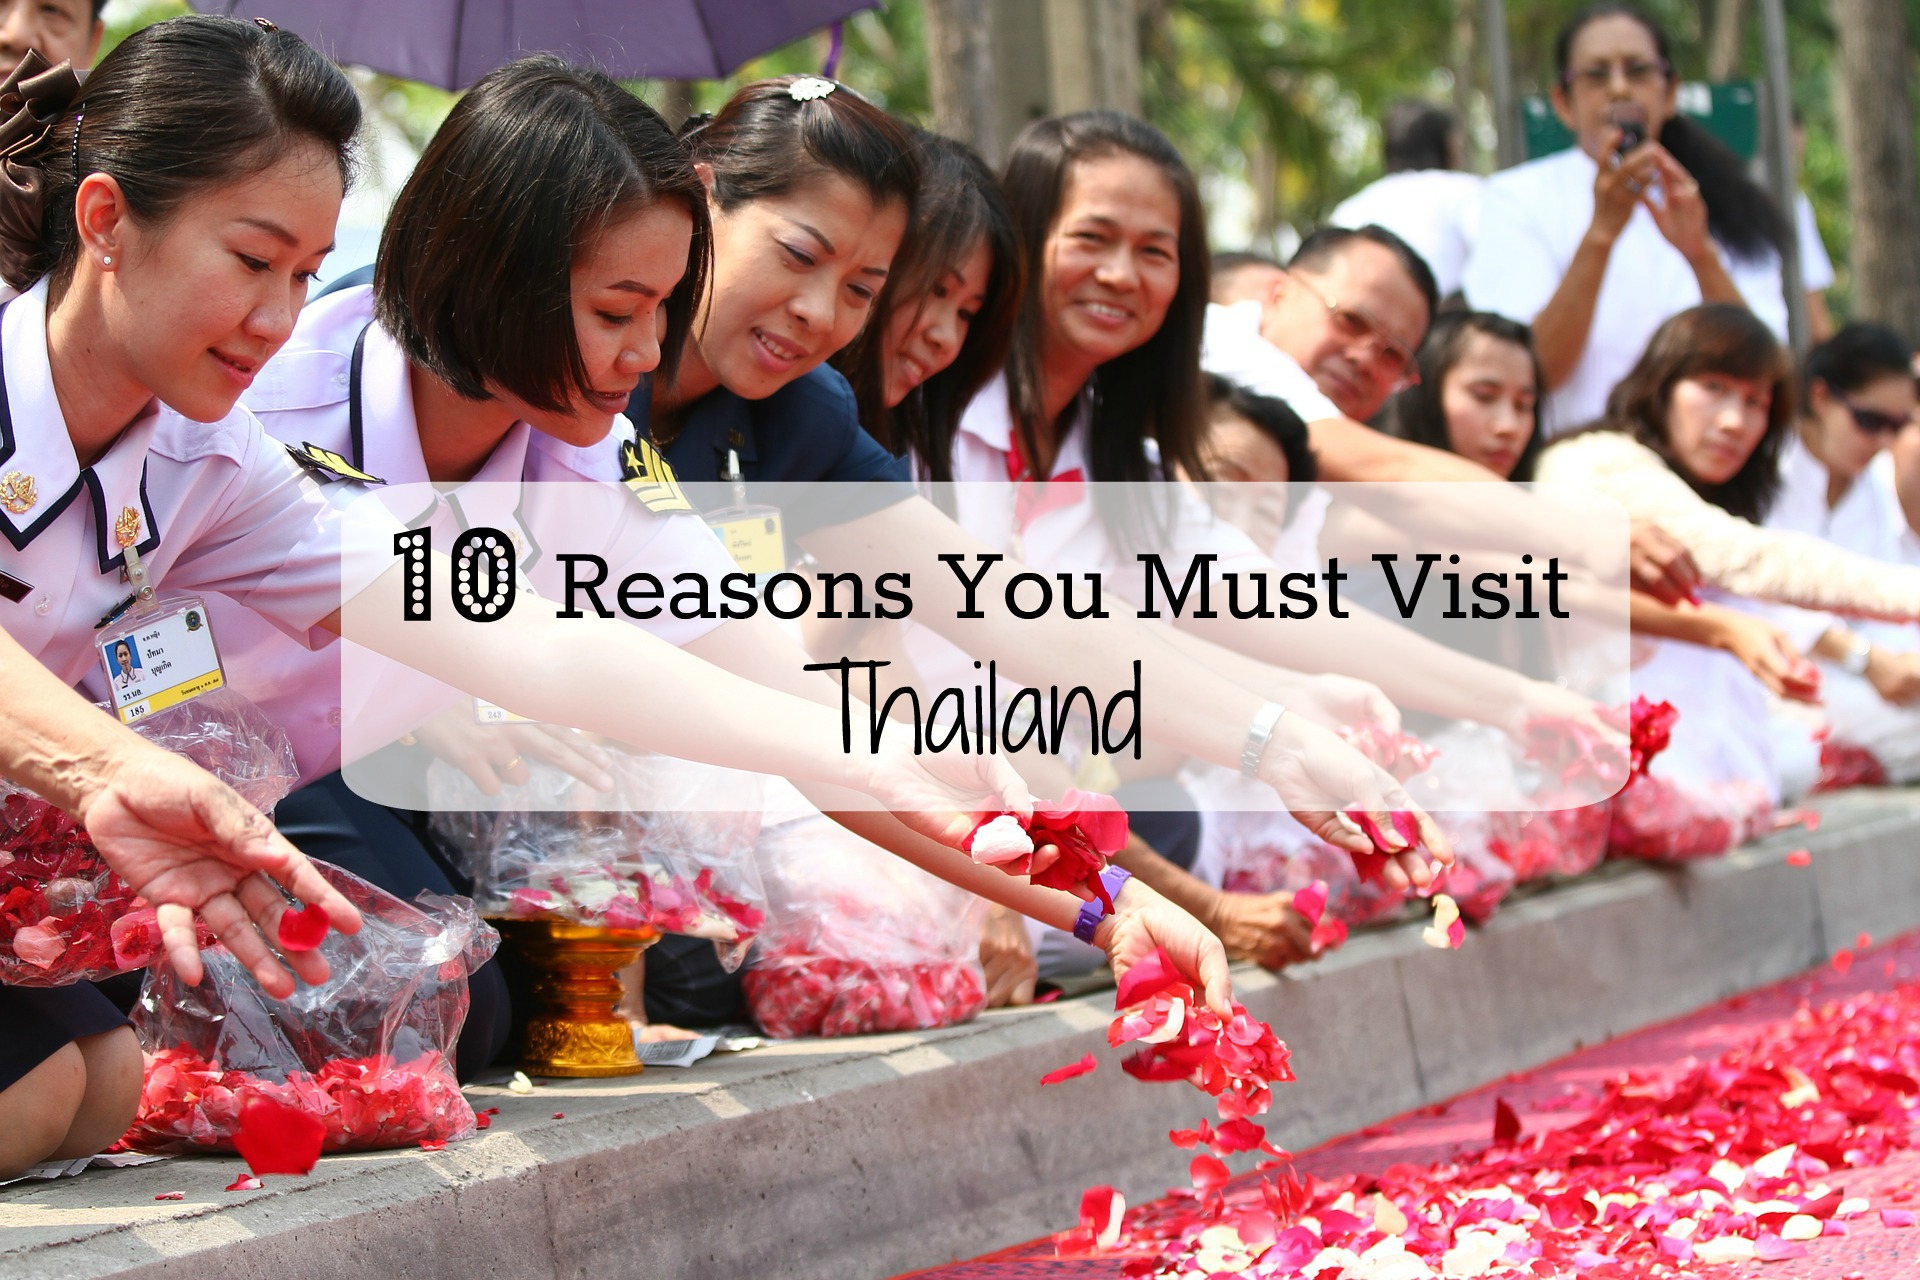 10 reasons you must visit thailand